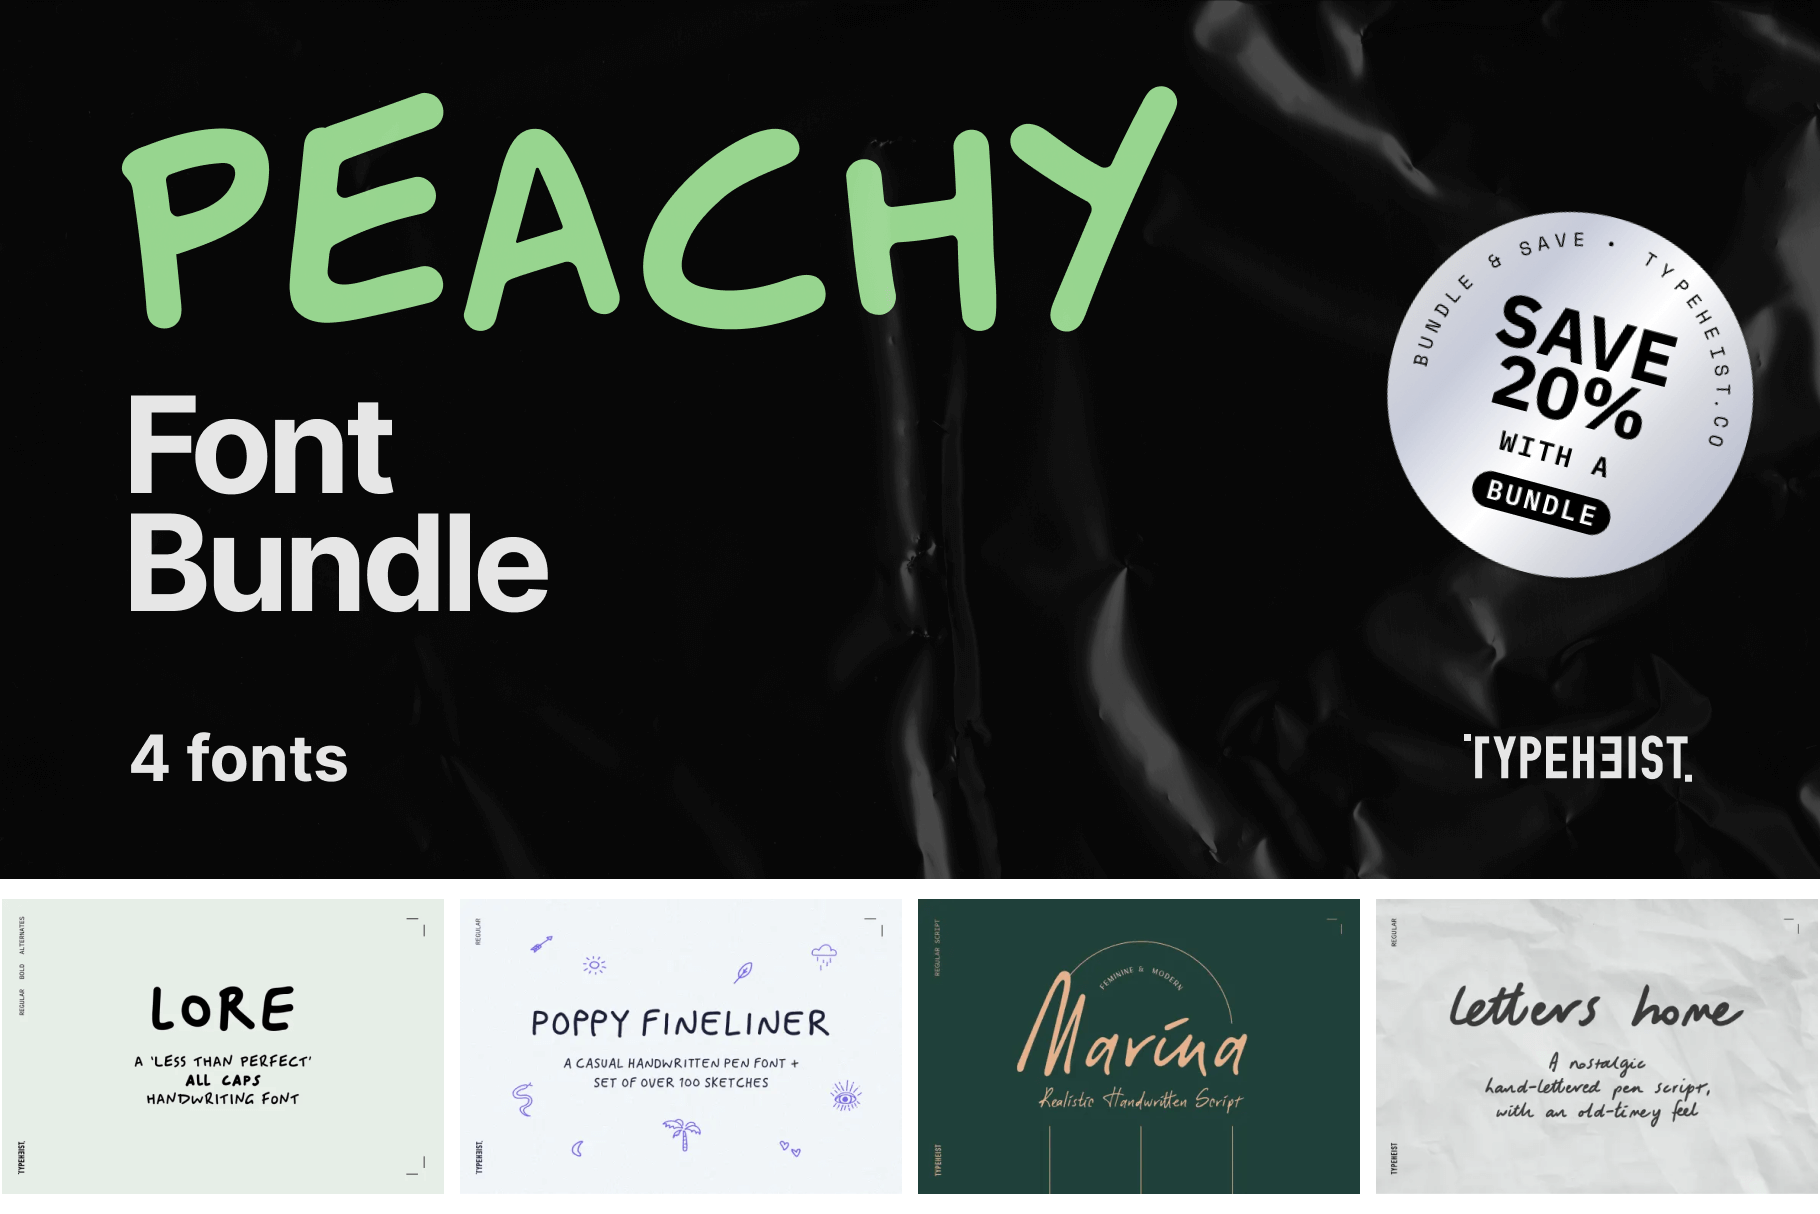 Peachy Font Bundle: 4 cute and casual handwriting fonts, in a bundle!